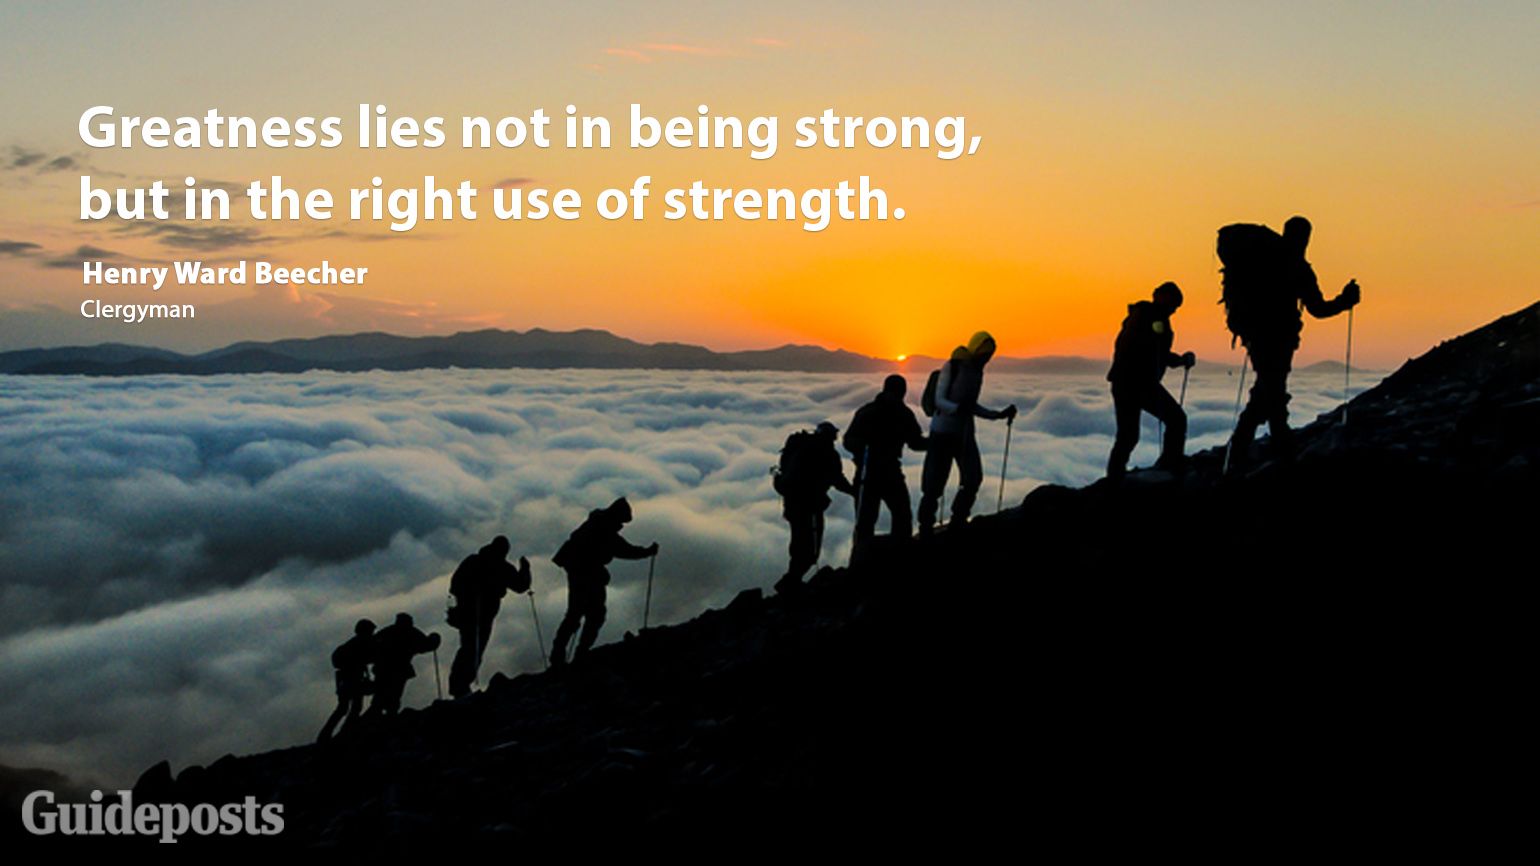 Greatness lies not in being strong, but in the right use of strength